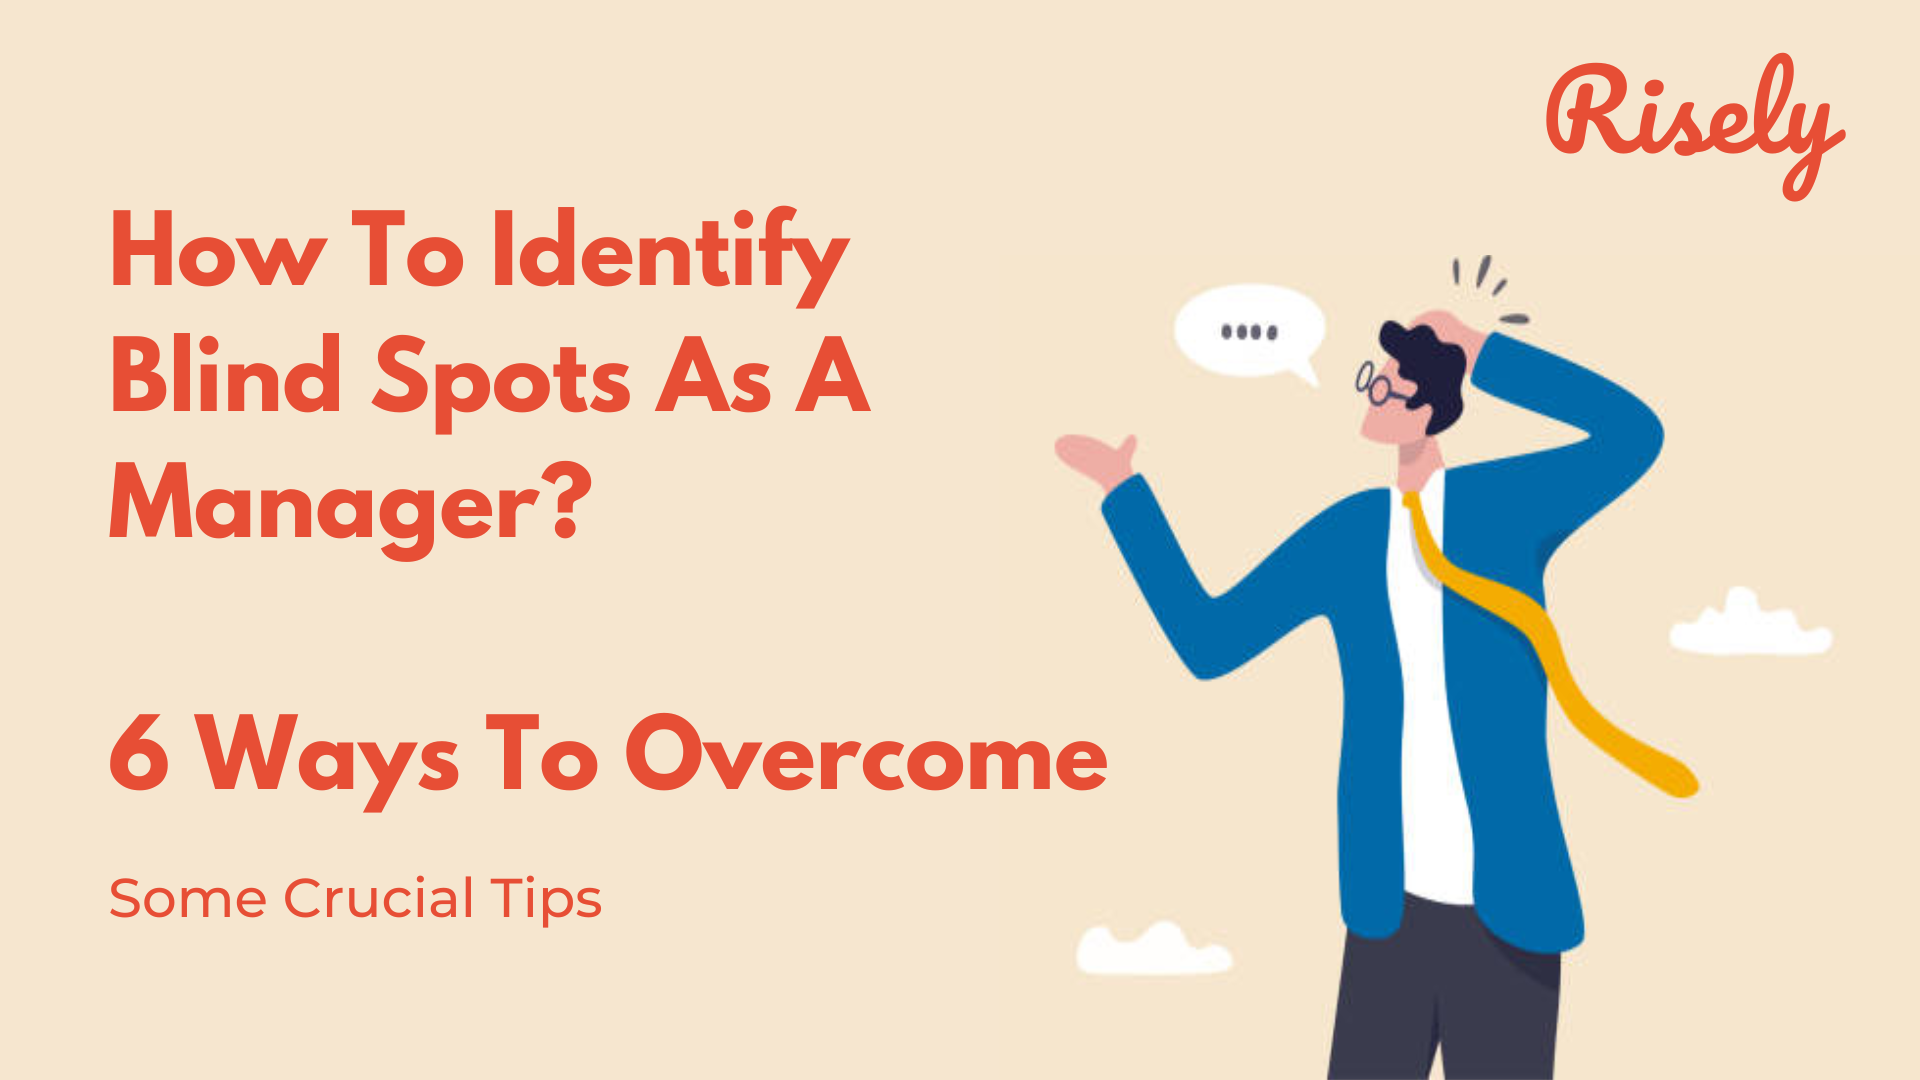 How To Identify Blind Spots As A Manager? 6 Ways To Overcome